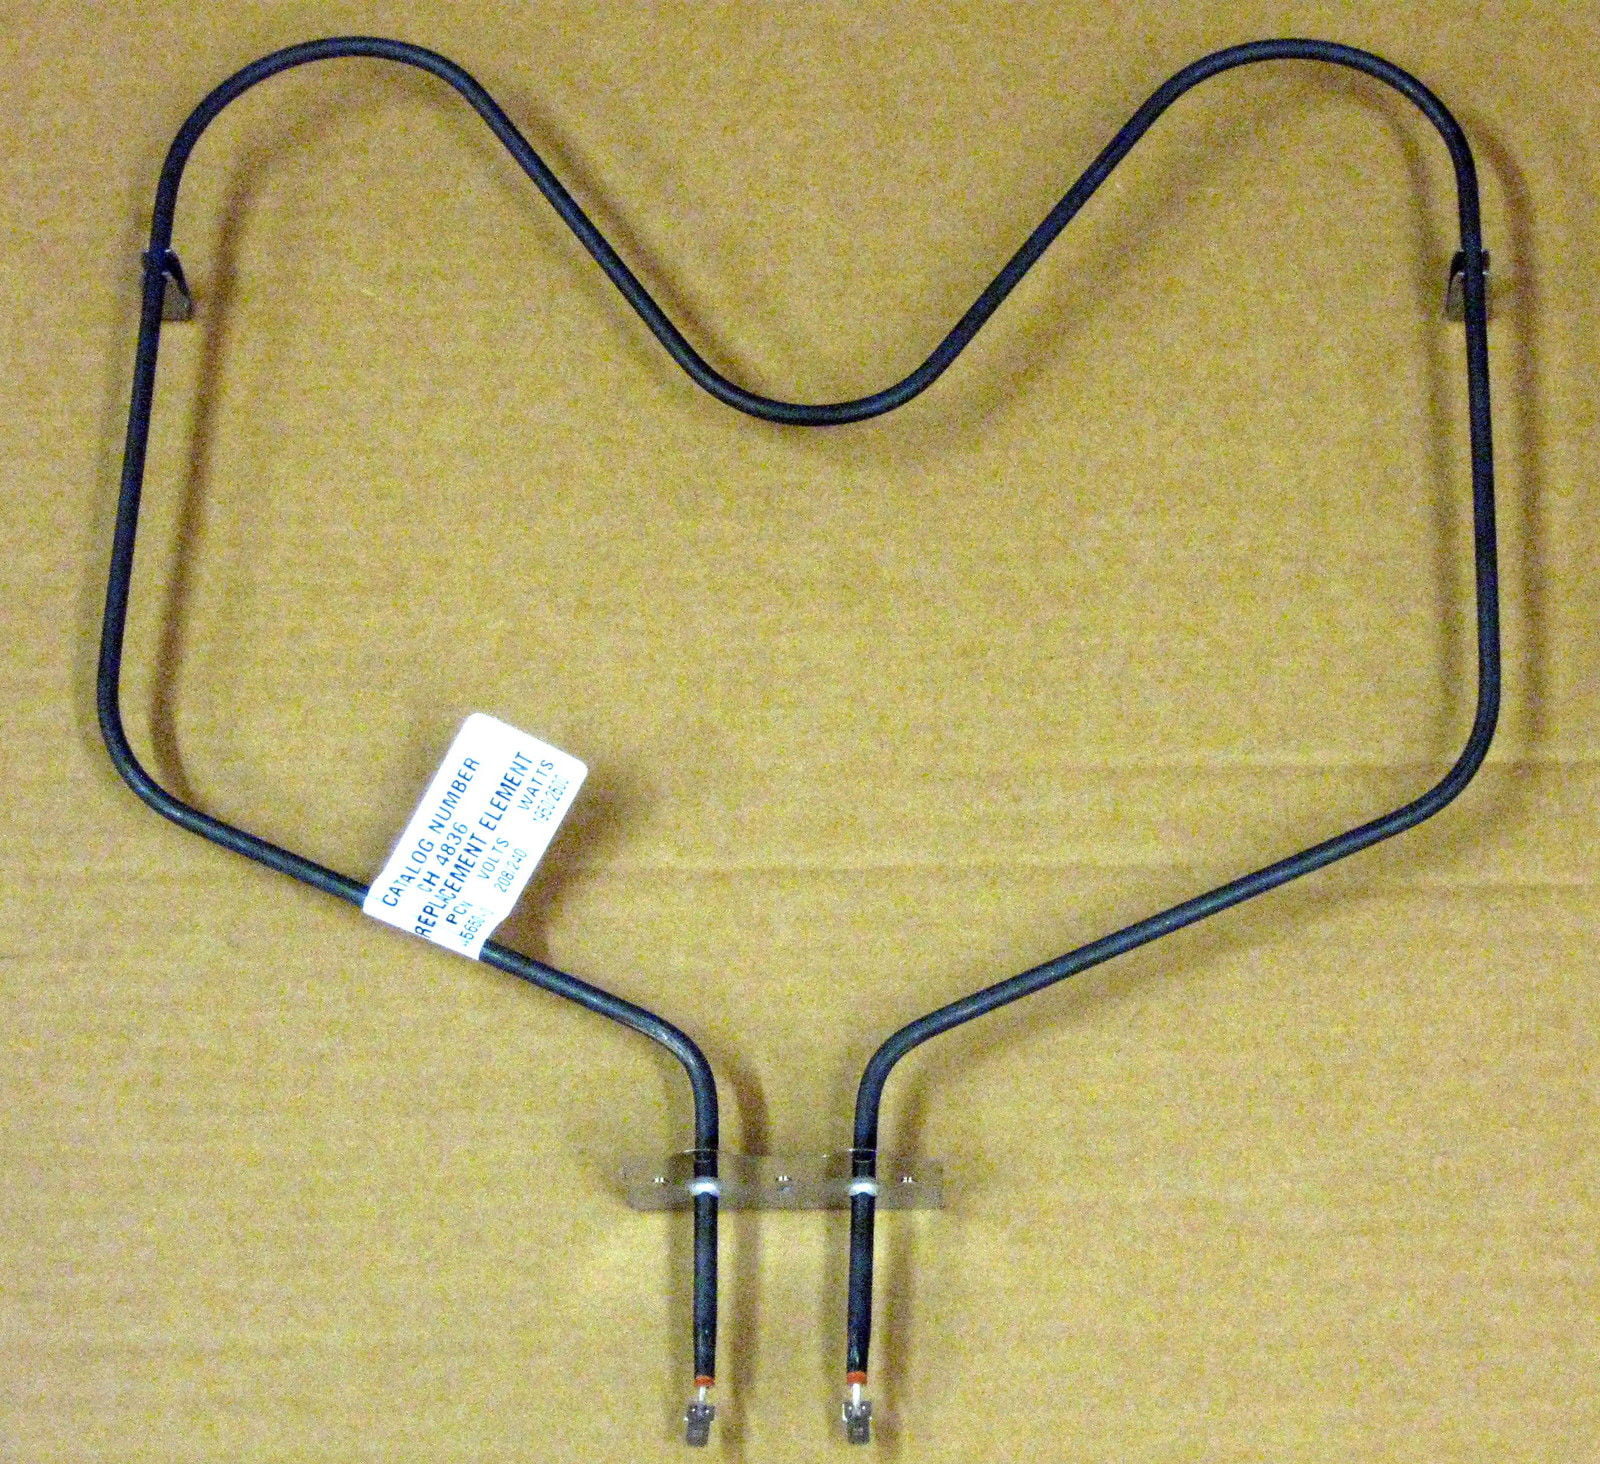 compatible with Kenmore Kenmore Oven Heating Element Replaces 456500 308180 Range Bake Element